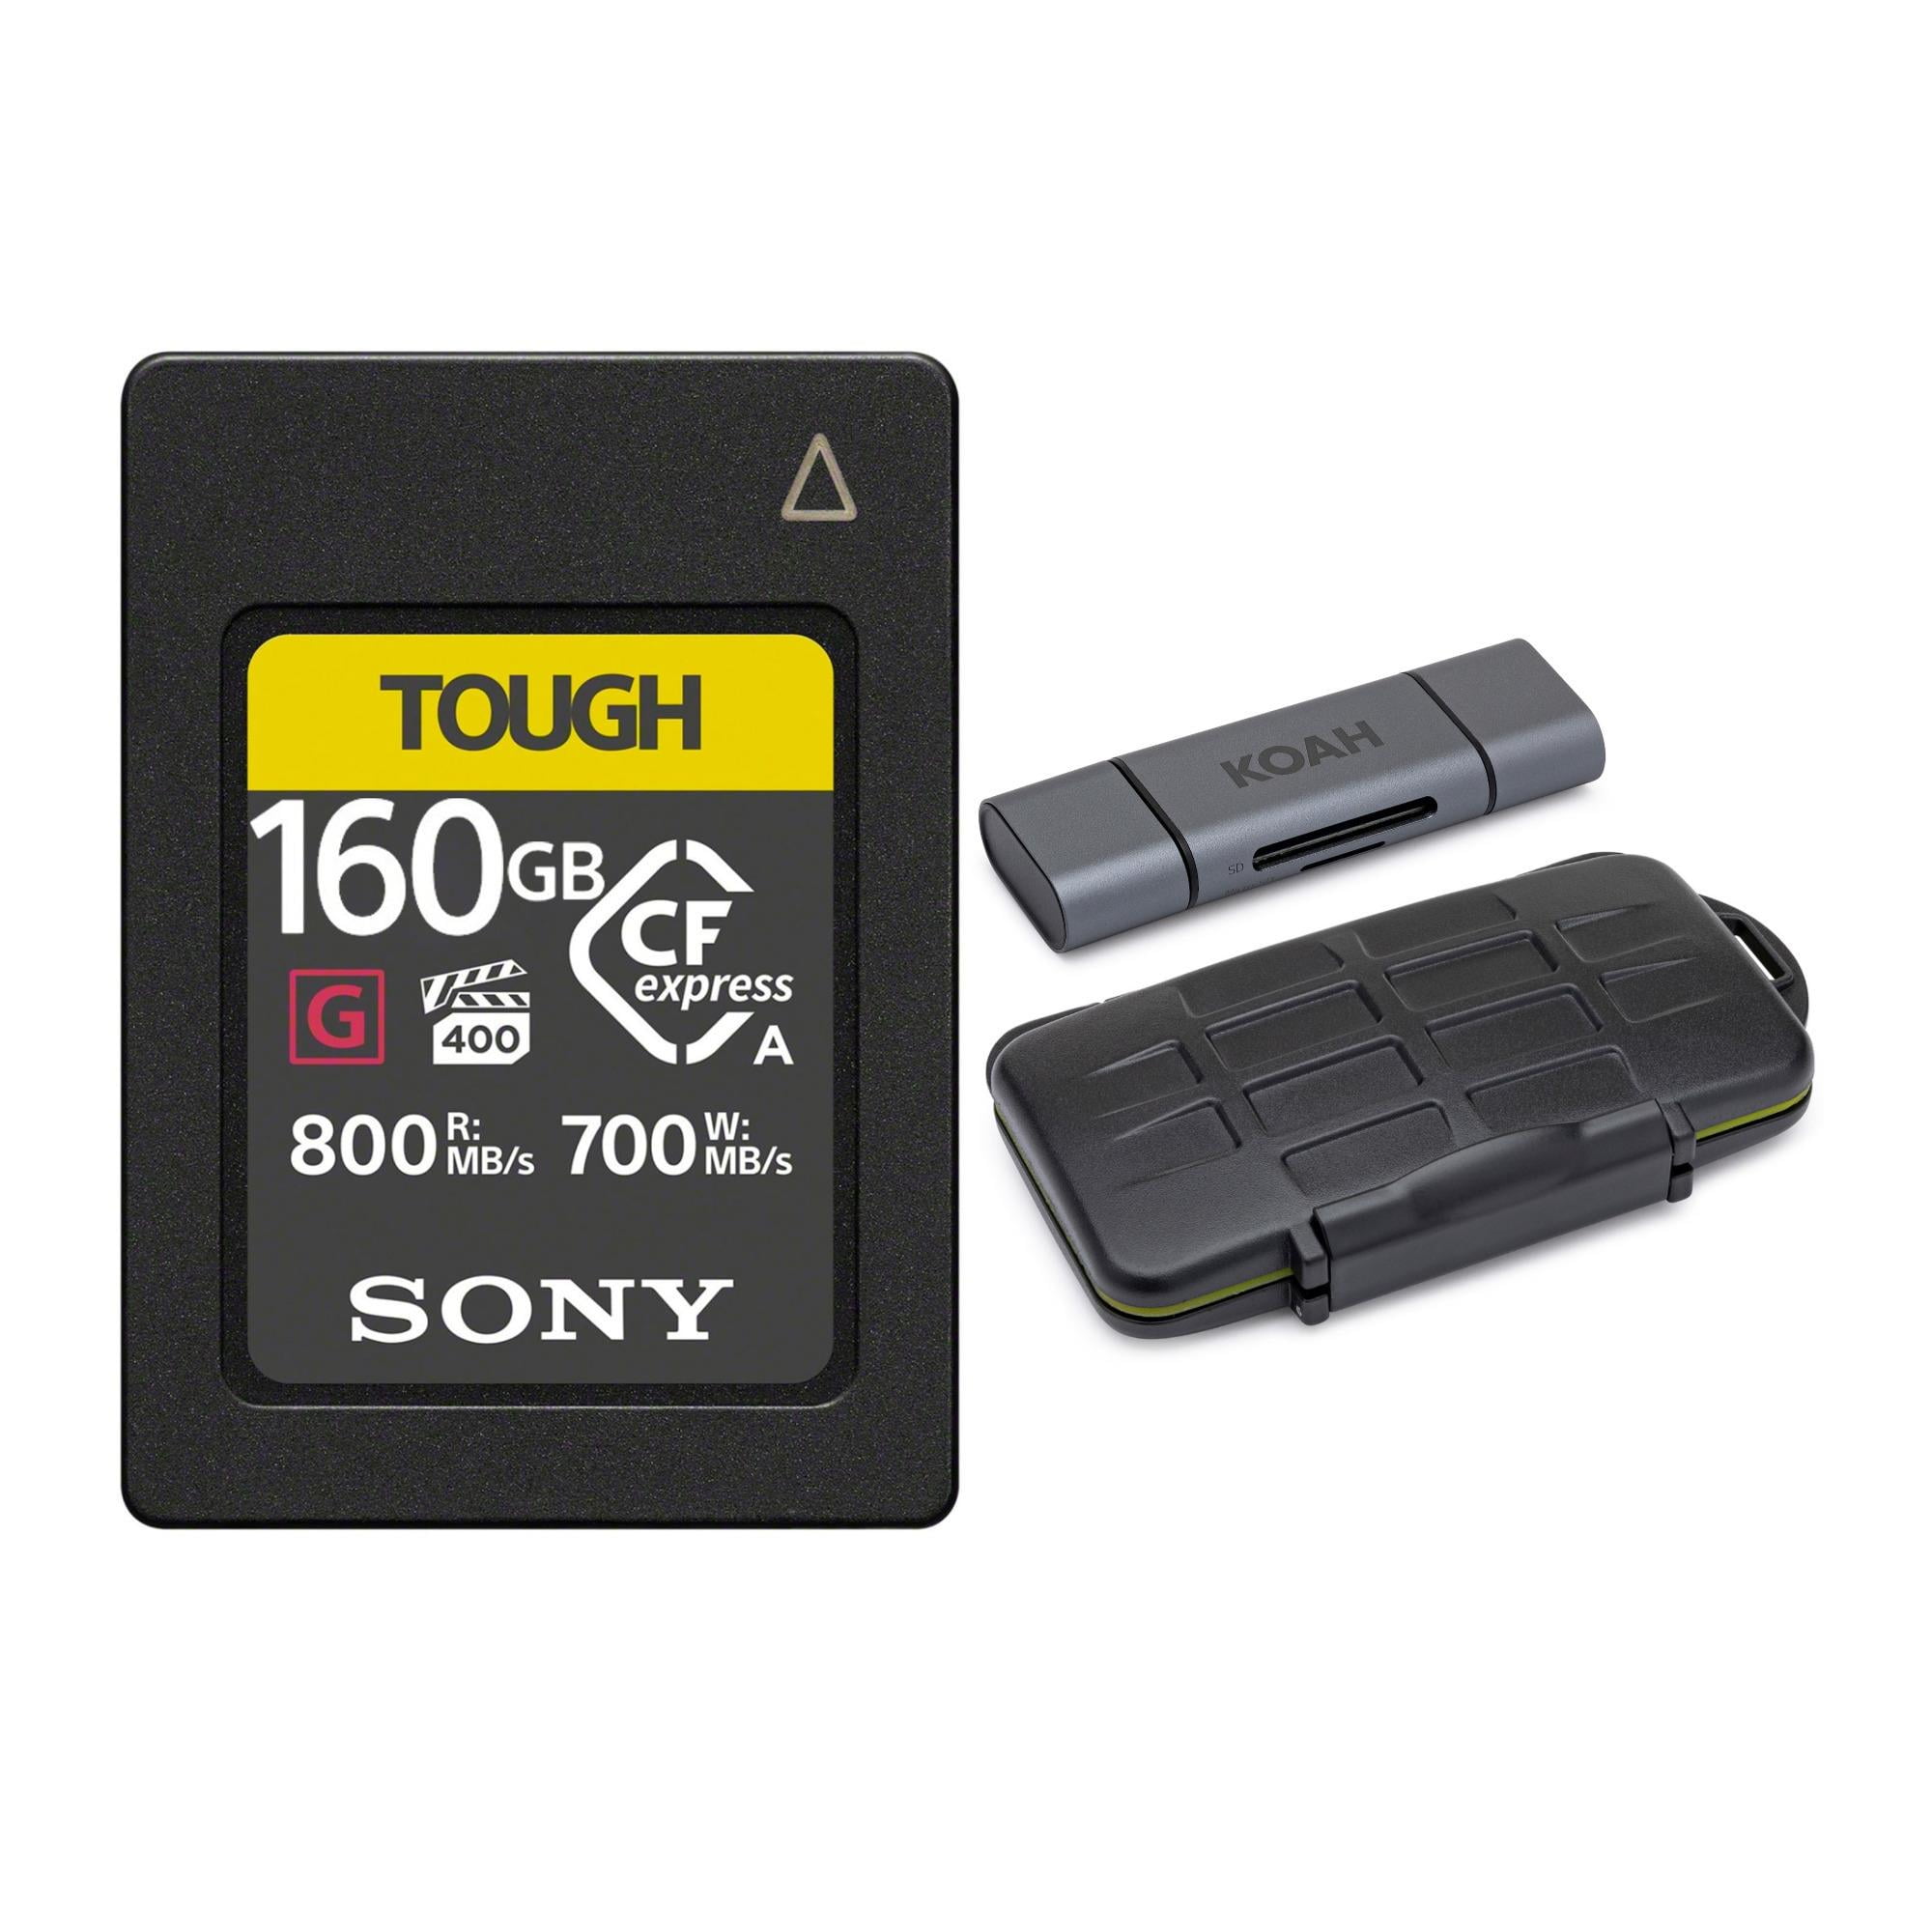 Sony CFexpress Type A 160GB Memory Card and Rugged Storage Carrying Case